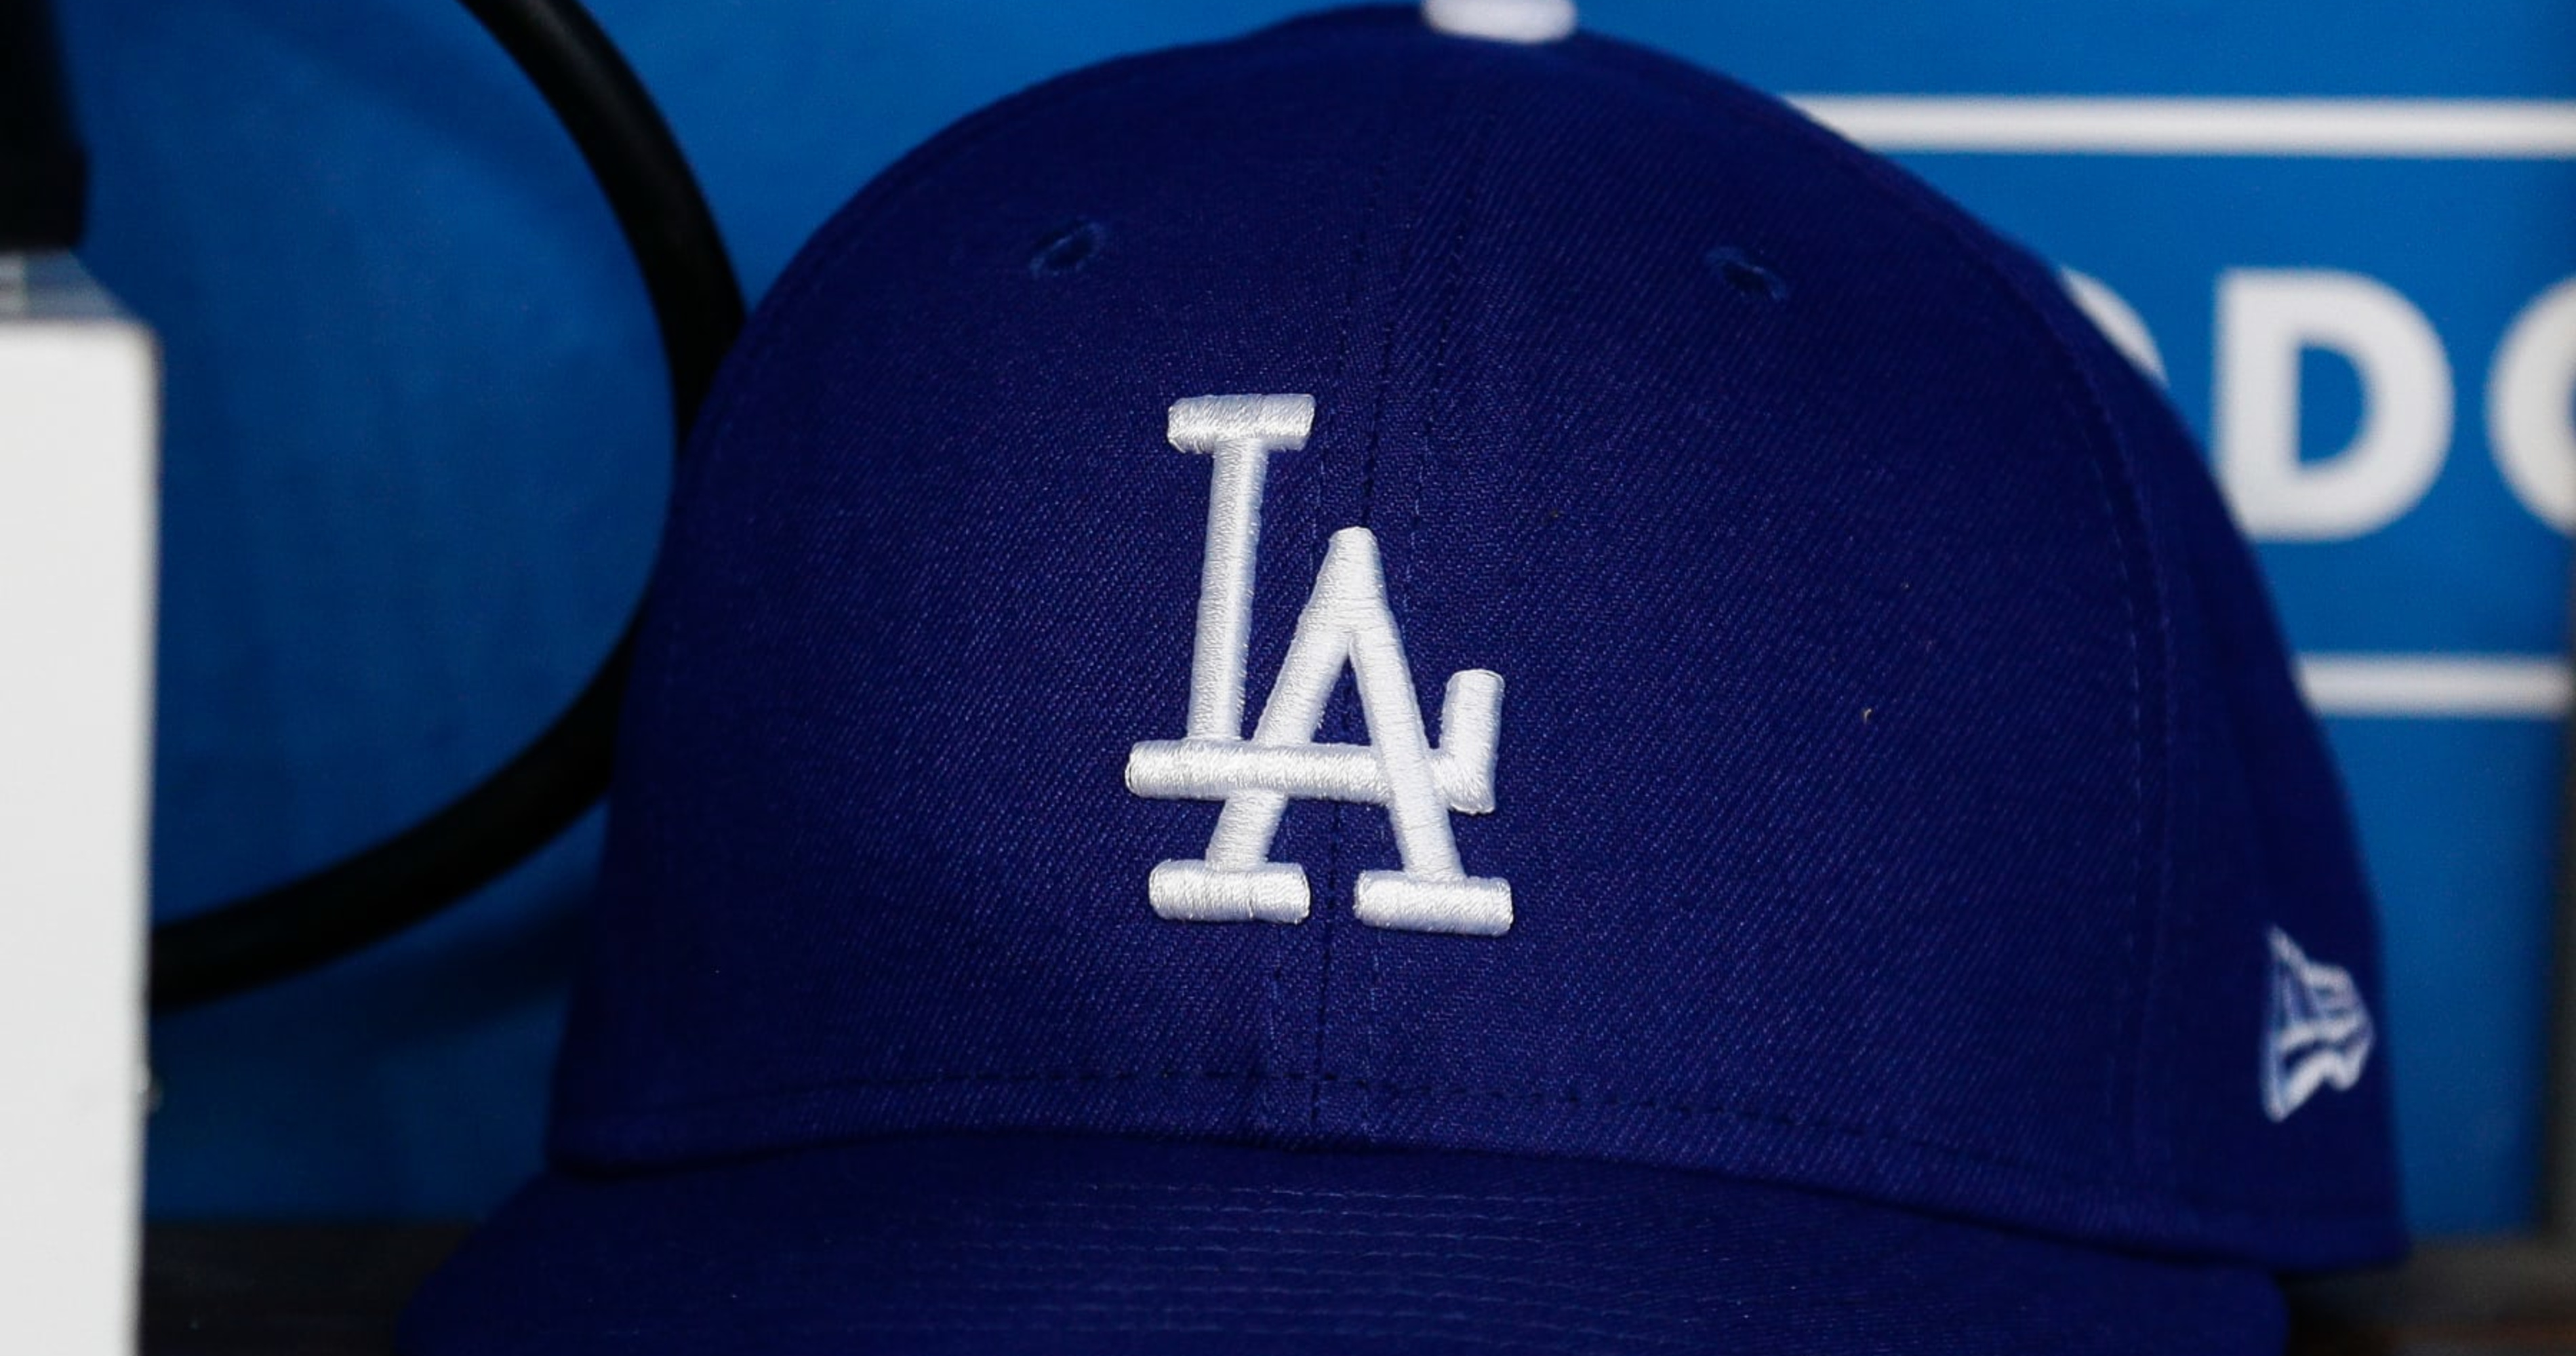 Dodgers Re-Invite Drag Group to Pride Night, Apologize to LGBTQ